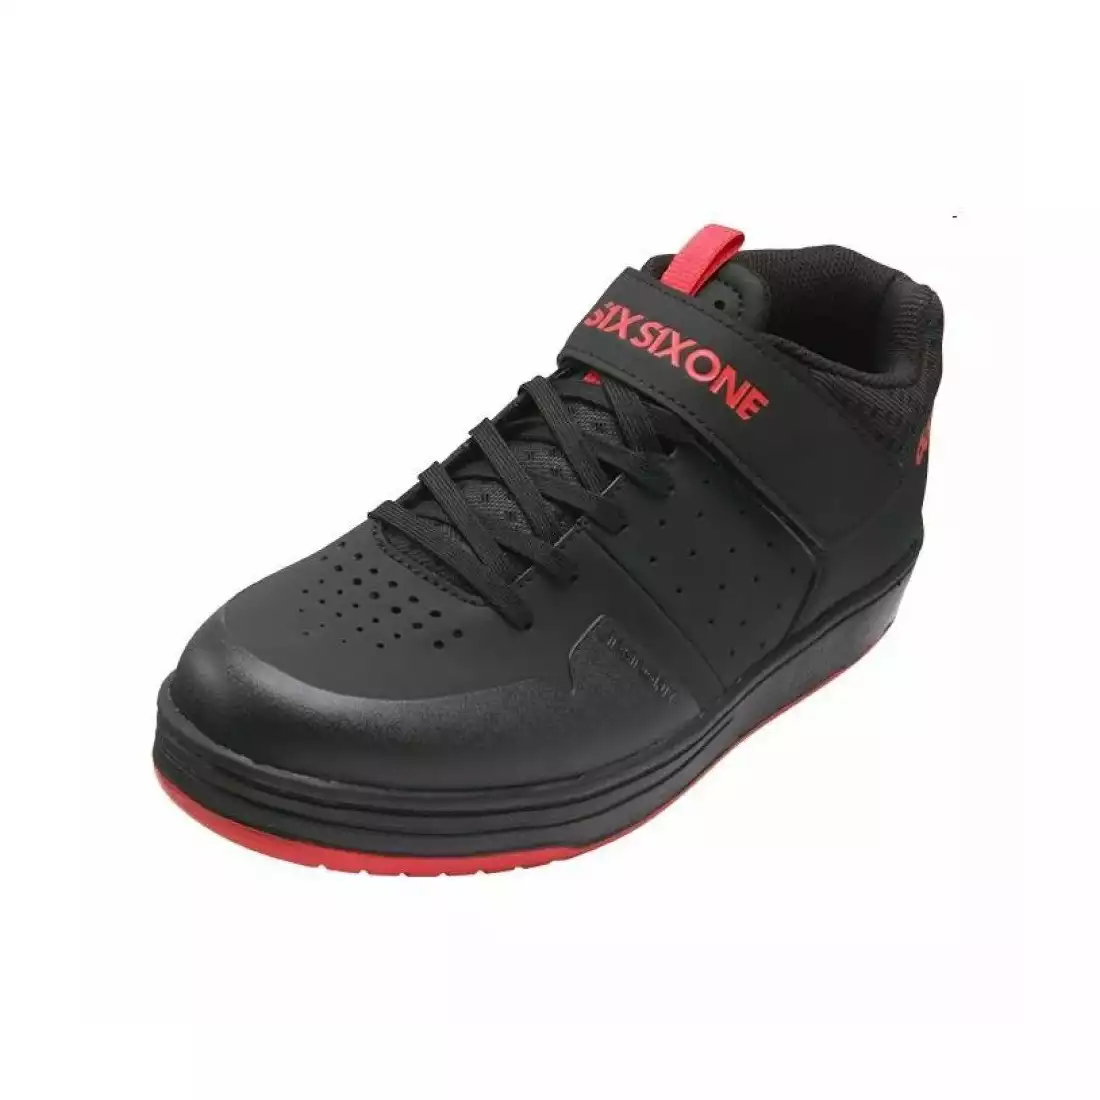 Black / Red SixSixOne Filter Flat Cycling Shoes 